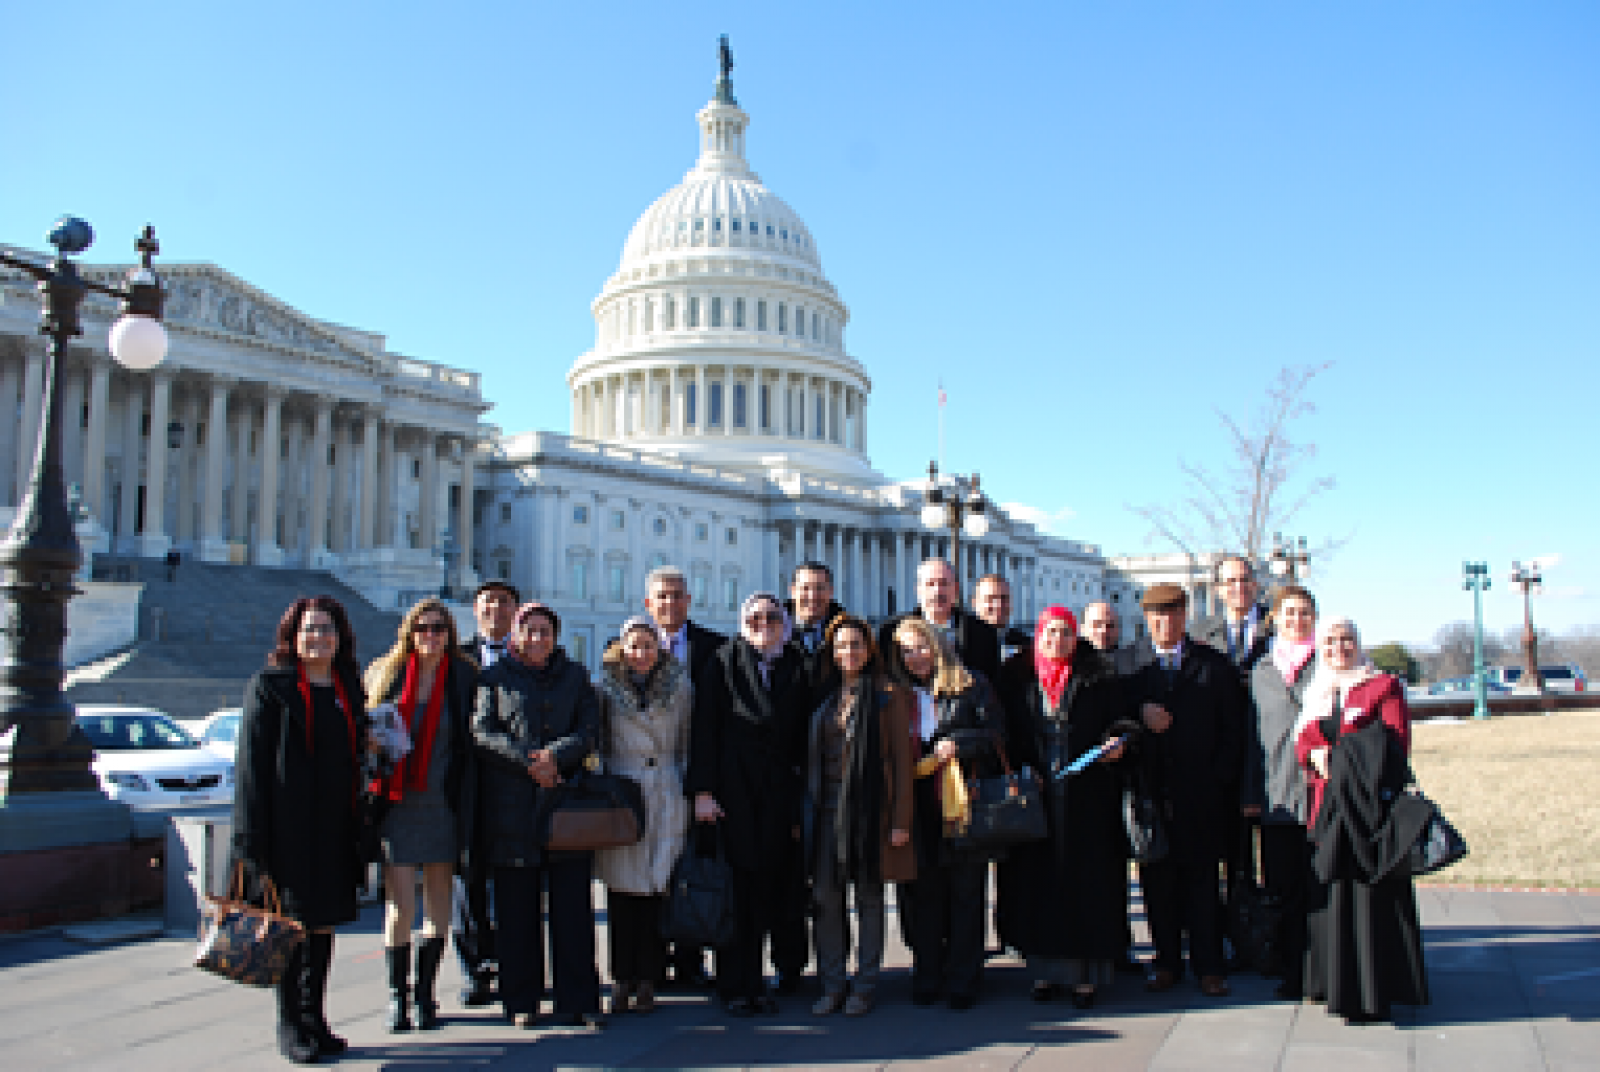 Middle East Parliamentarians  Discuss Legislating, Budgeting and Women’s Political Participation in Washington, Richmond Visits 